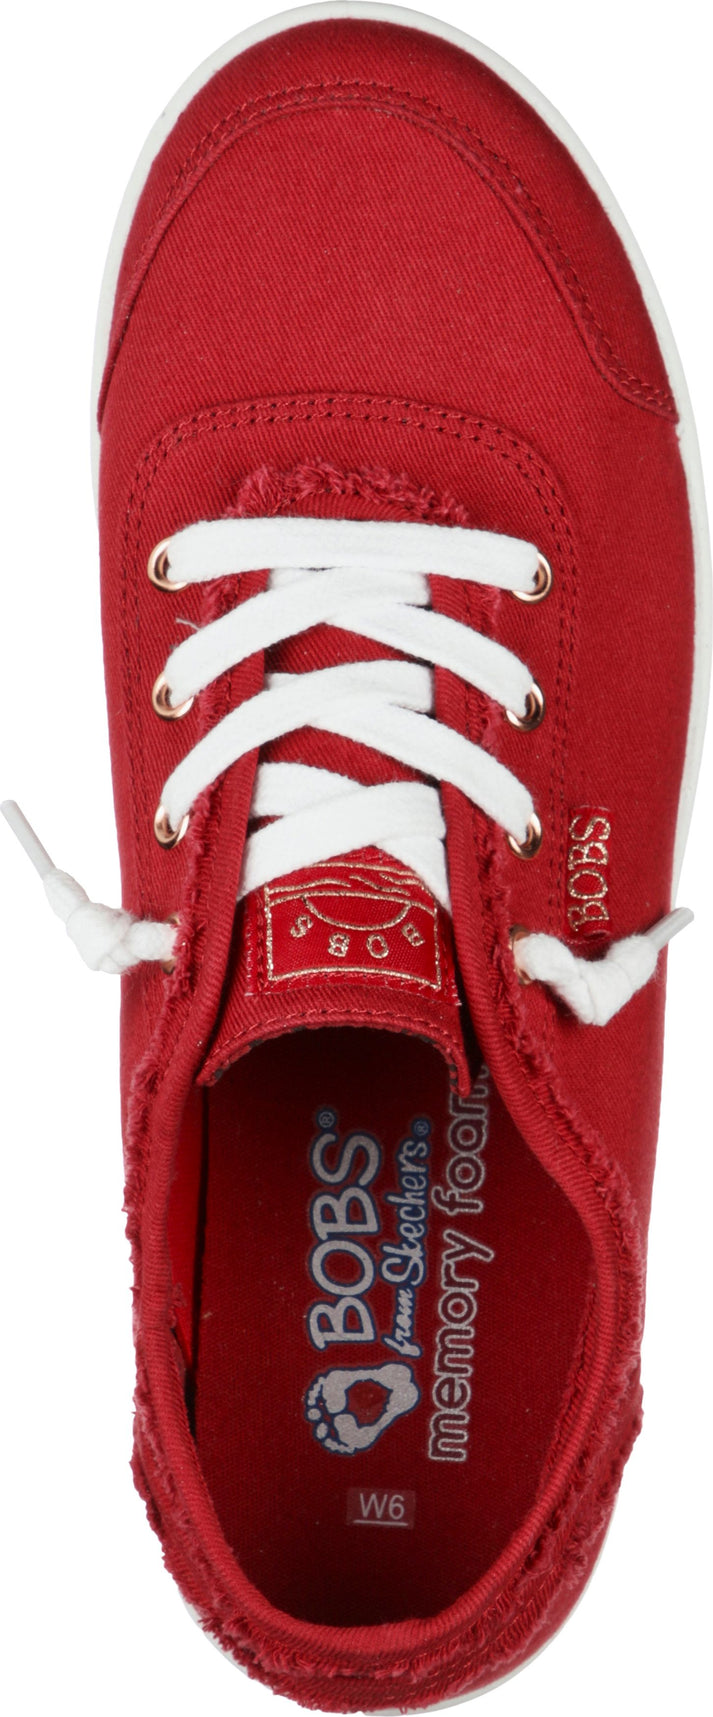 Skechers Shoes Bobs B Cute Red